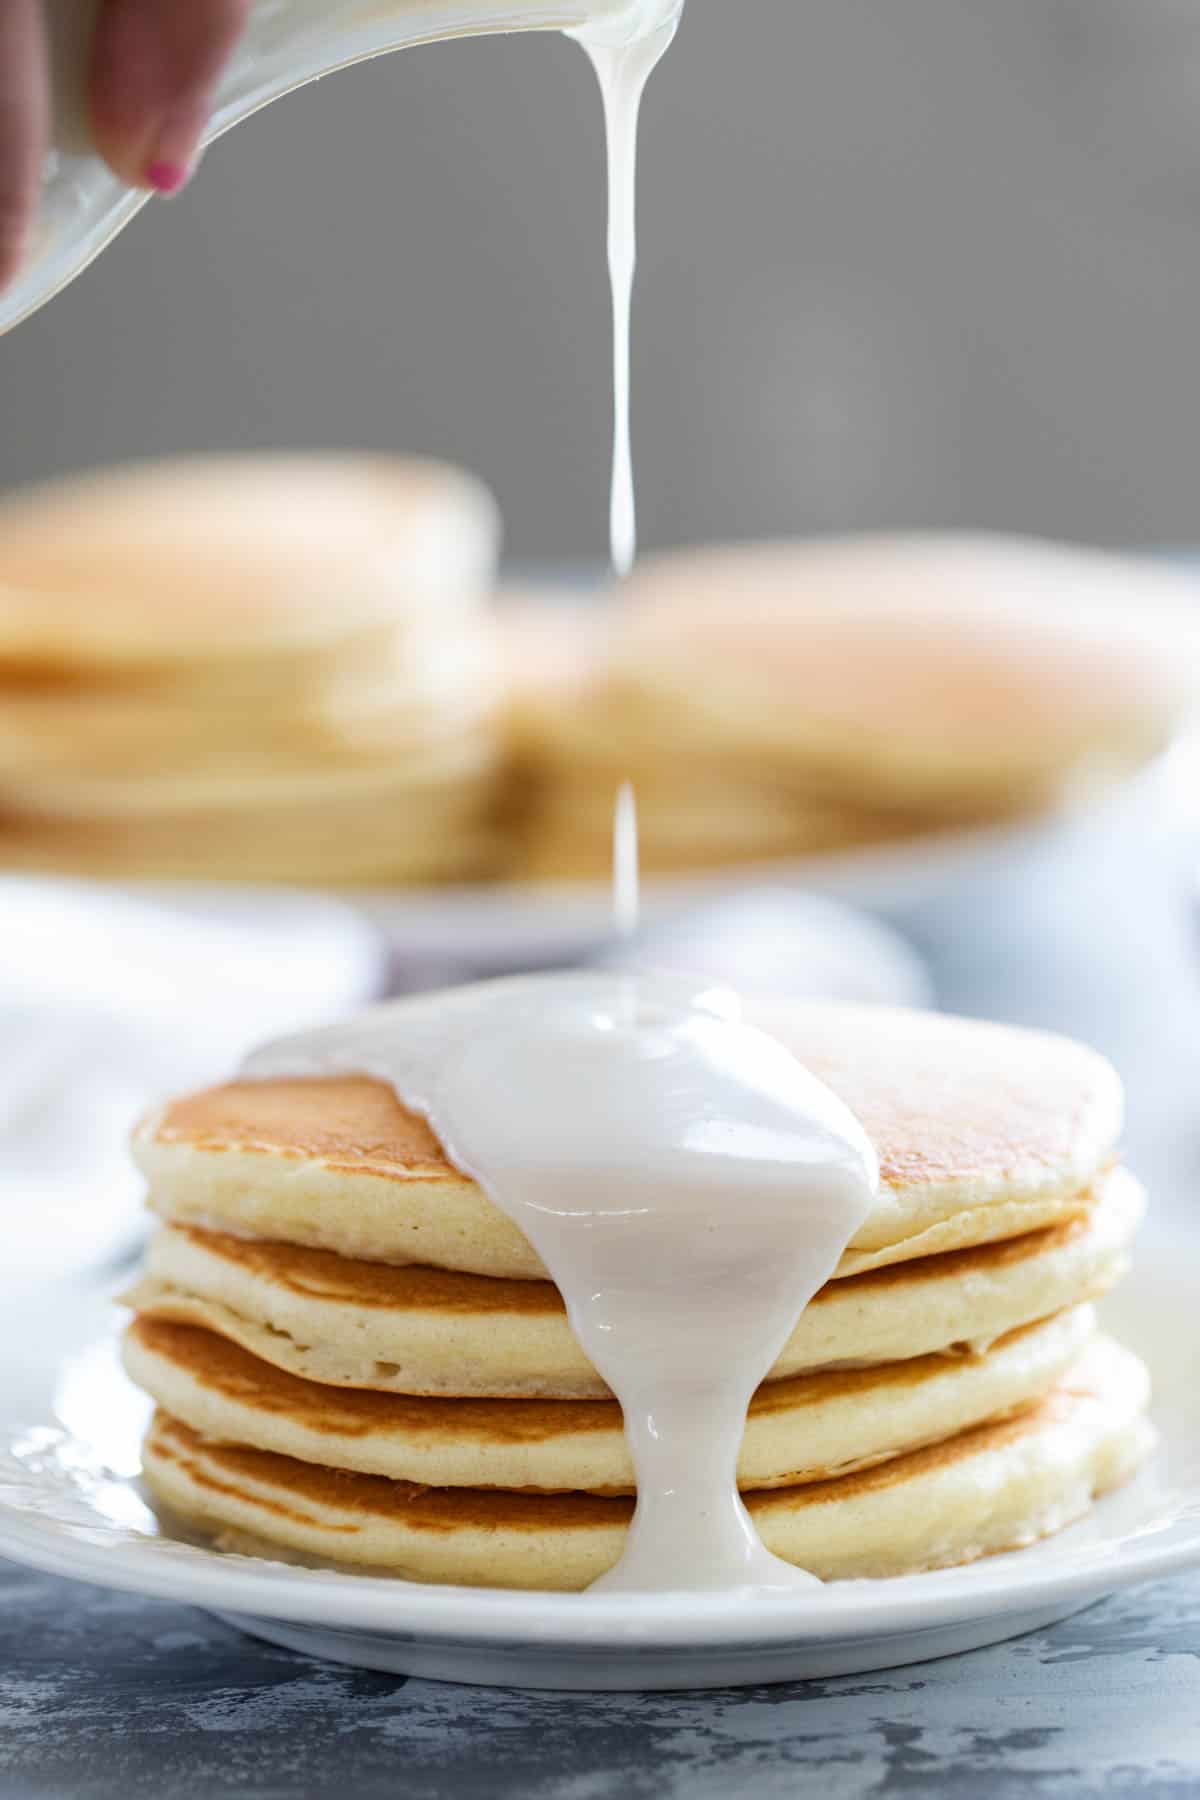 Pouring coconut syrup on a stack of pancakes.